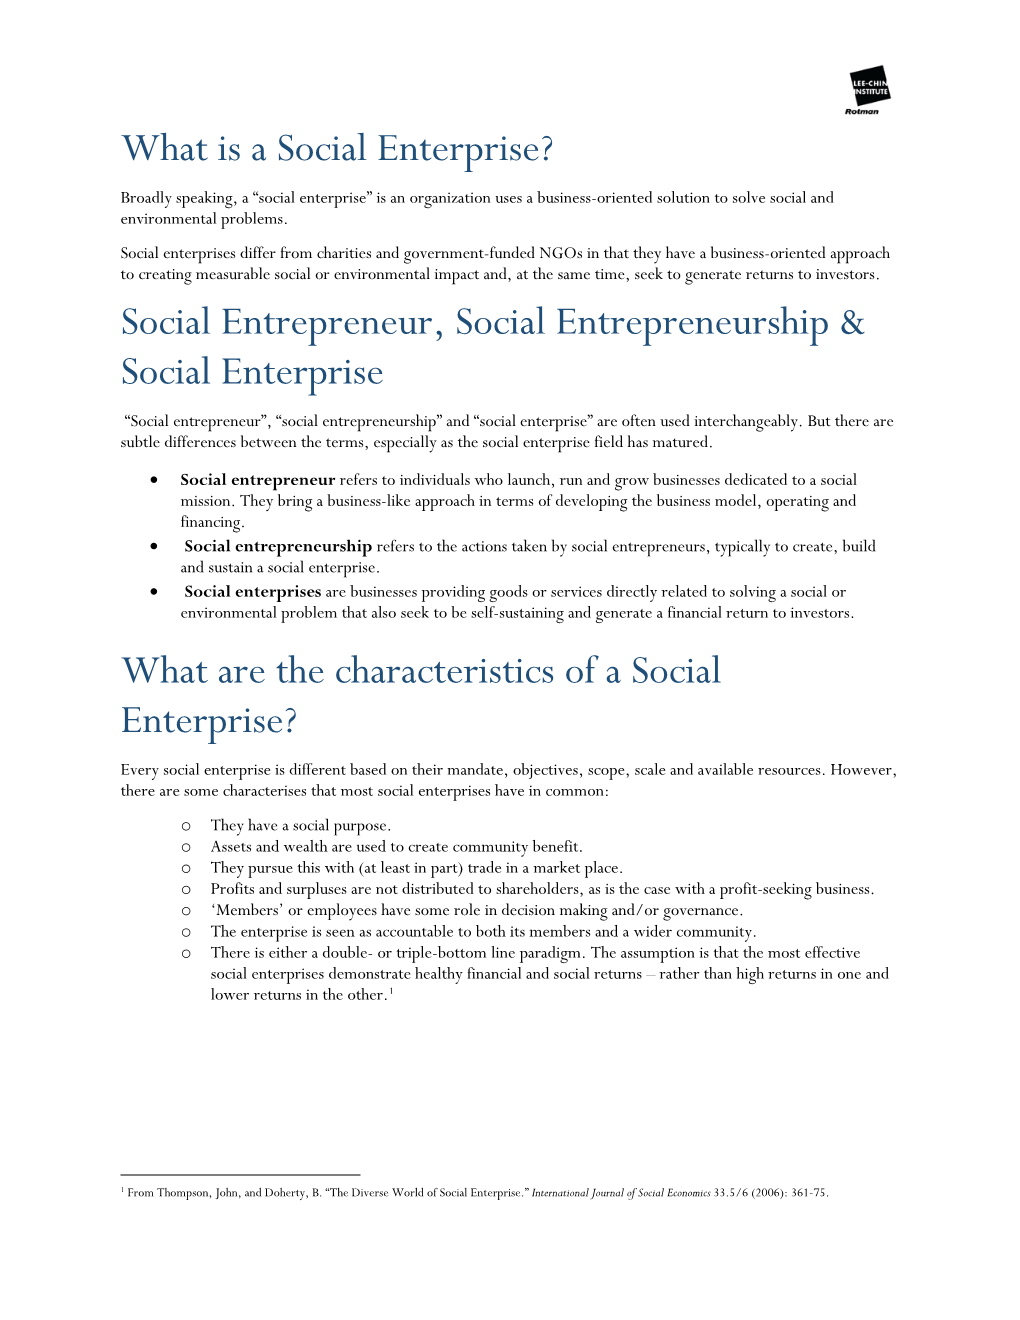 What Is a Social Enterprise? Broadly Speaking, a “Social Enterprise” Is an Organization Uses a Business-Oriented Solution to Solve Social and Environmental Problems